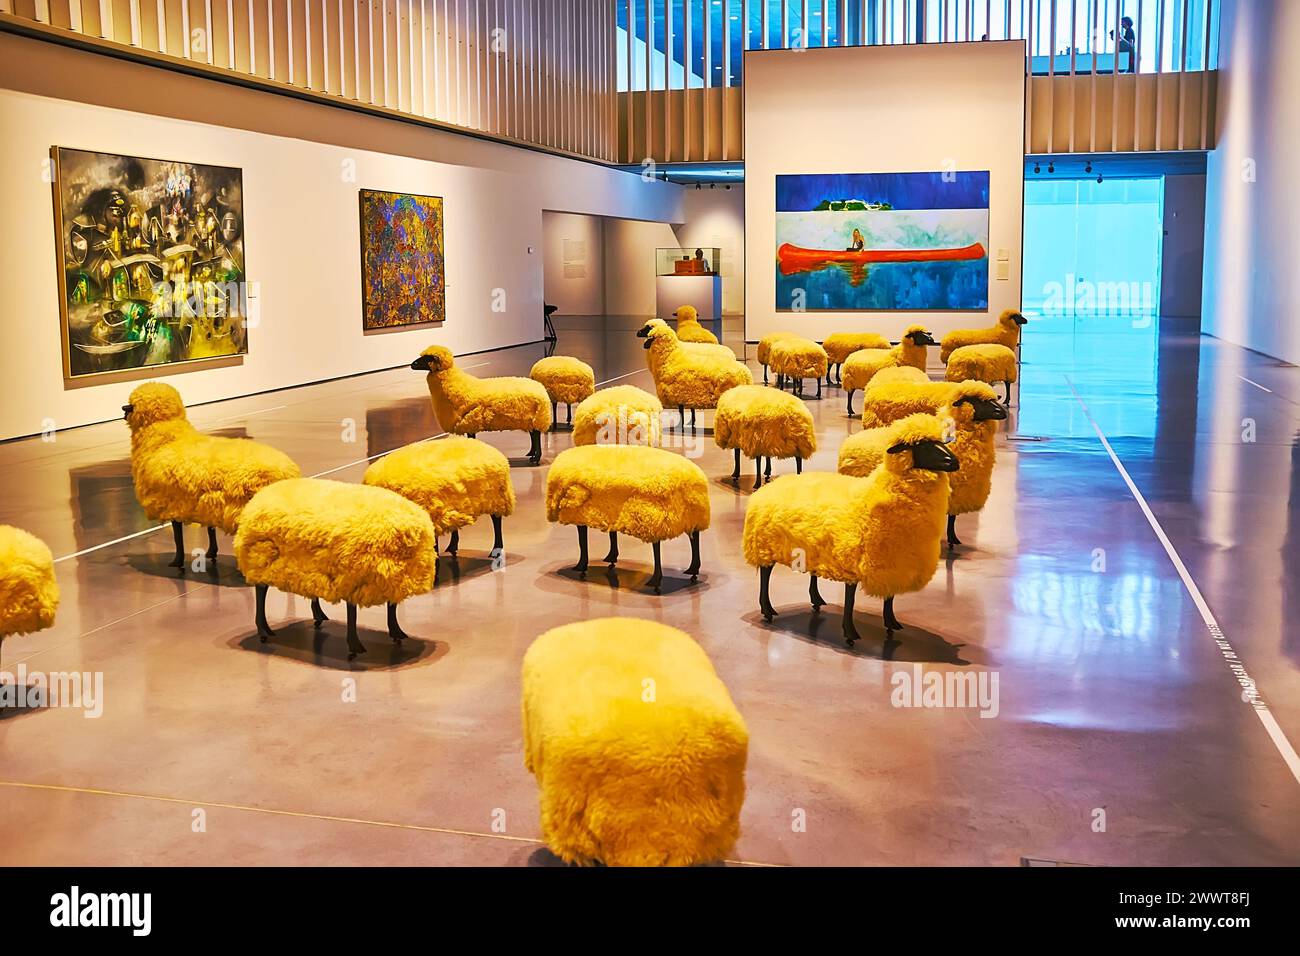 MALAGA, SPAIN - SEPT 28, 2019: The flock of sheep by François-Xavier Lalanne in a hall of Centre Pompidoy Museum with paintings on the walls, around t Stock Photo